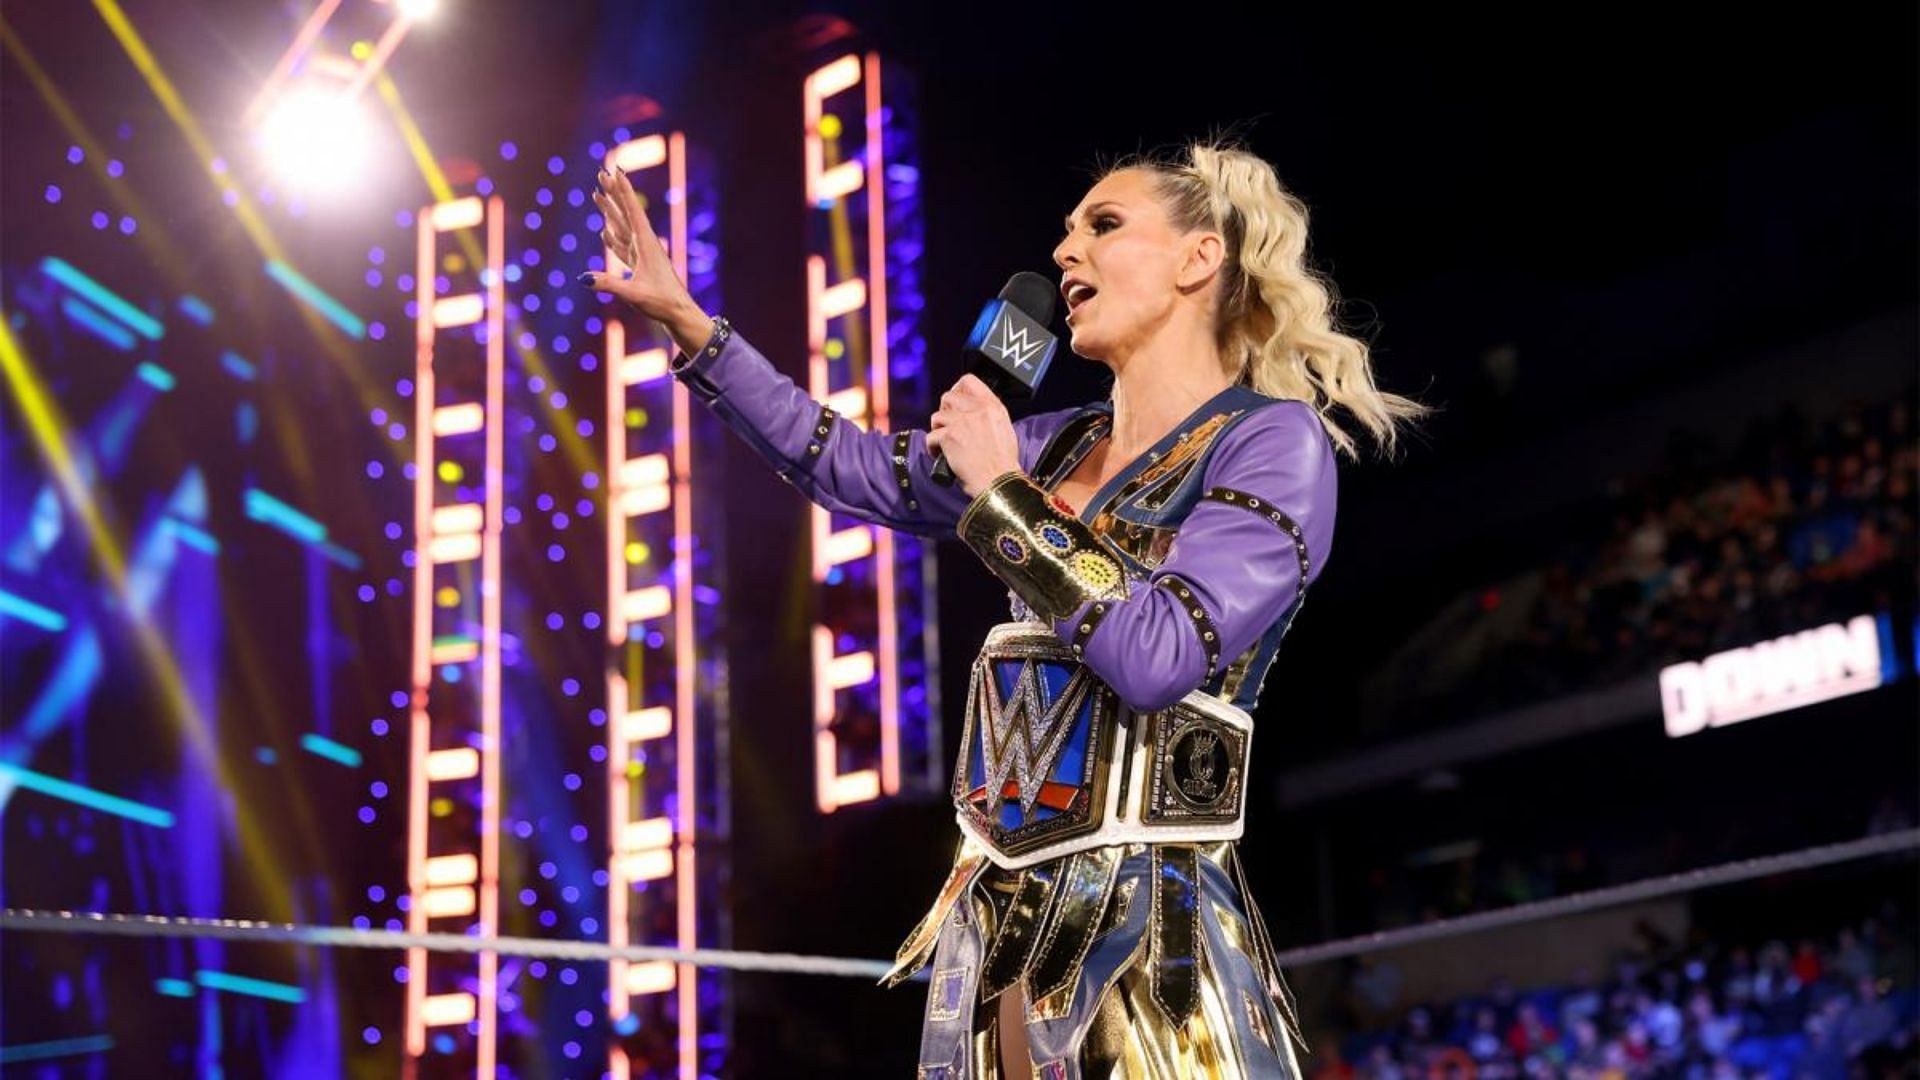 Charlotte Flair sees Wrestlemania 38 as a full-circle moment for her WWE career.